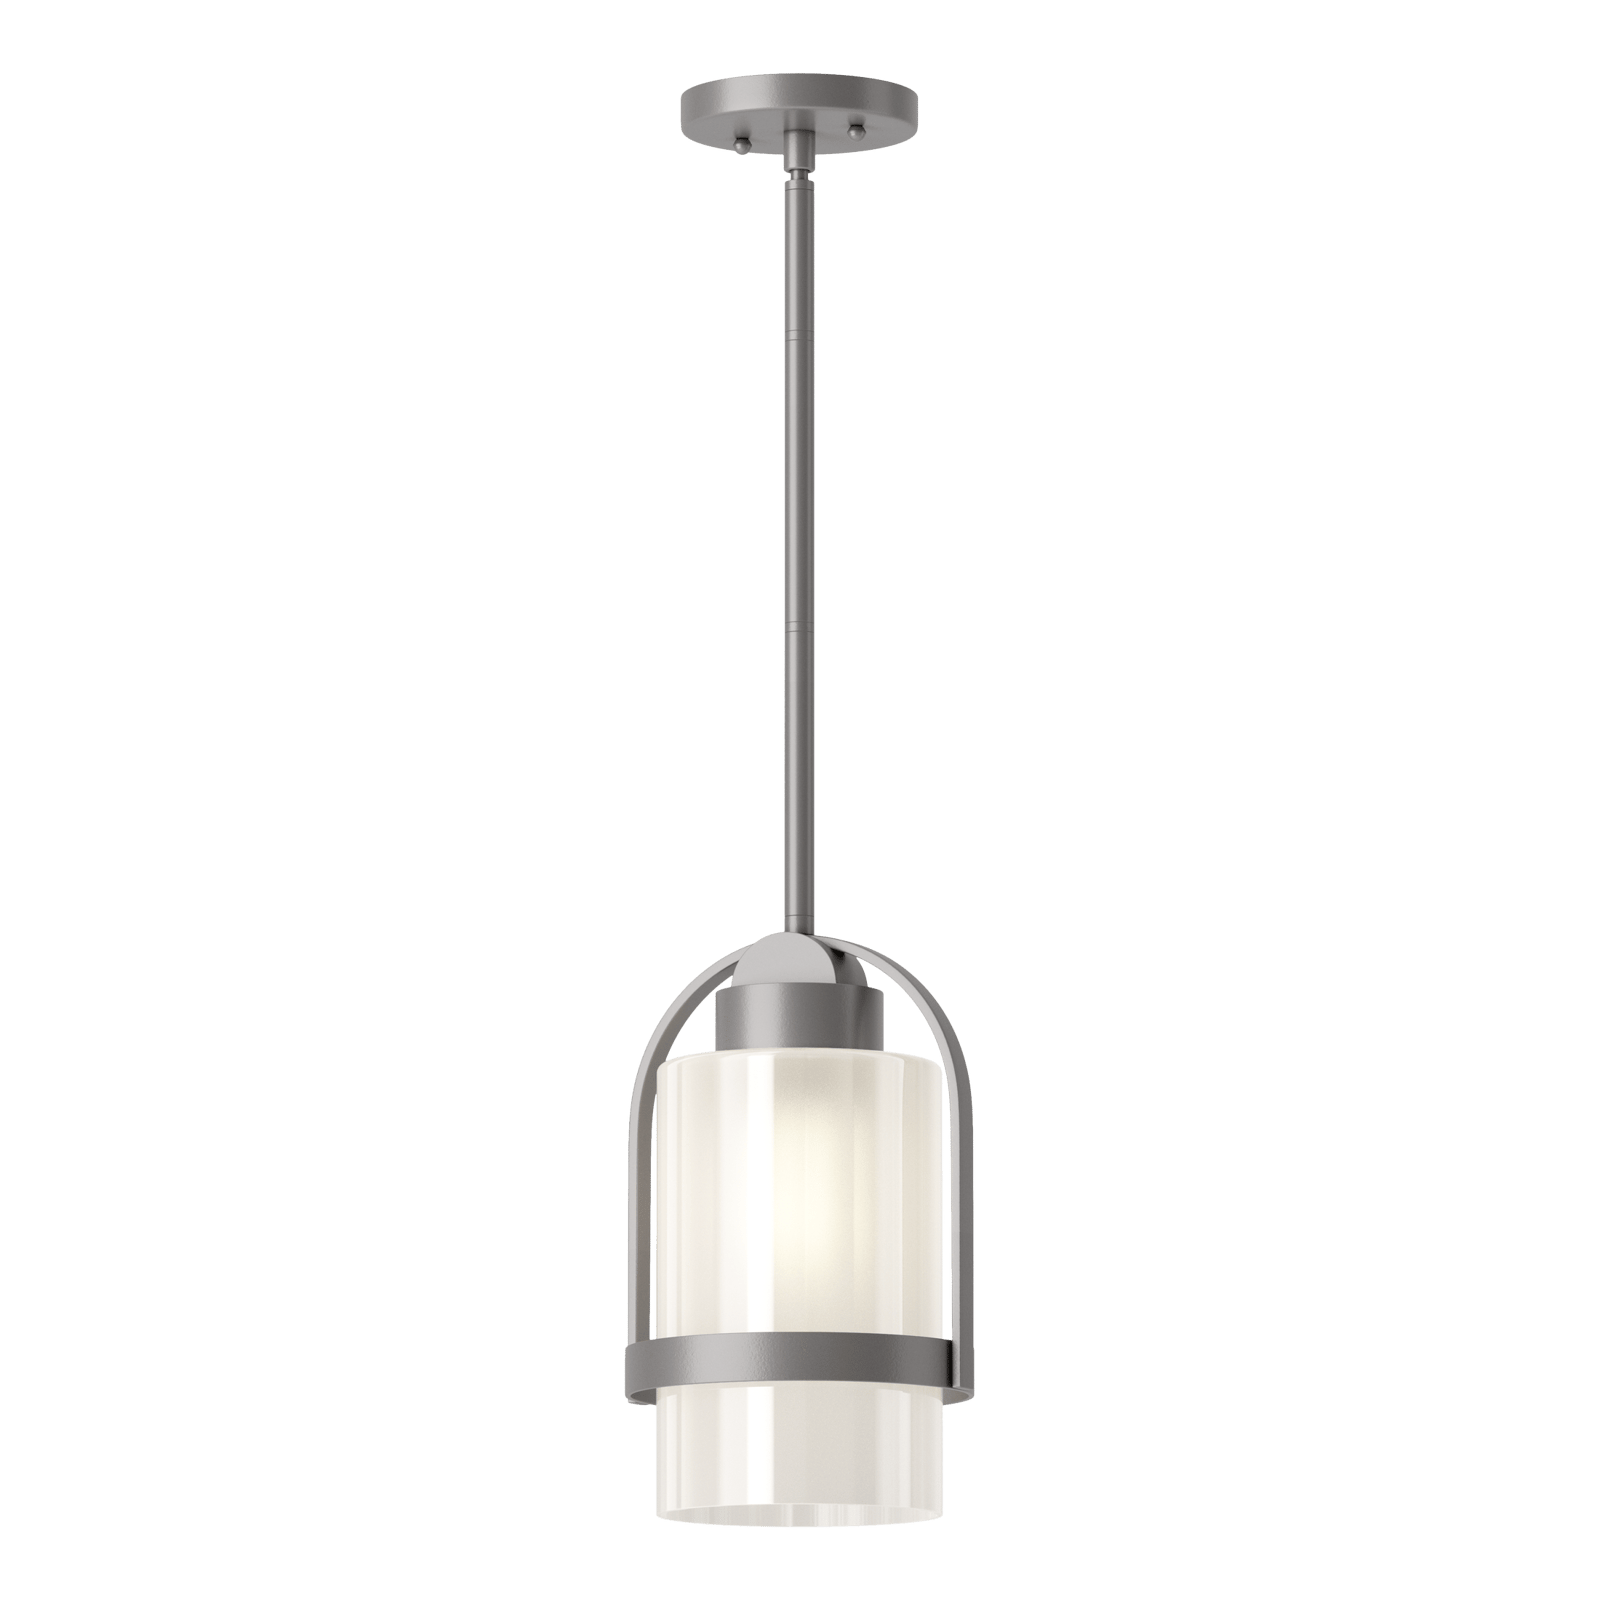 Hubbardton Forge Alcove Outdoor Pendant Outdoor Light Fixture l Hanging Hubbardton Forge Coastal Burnished Steel Frosted Glass (FD) 